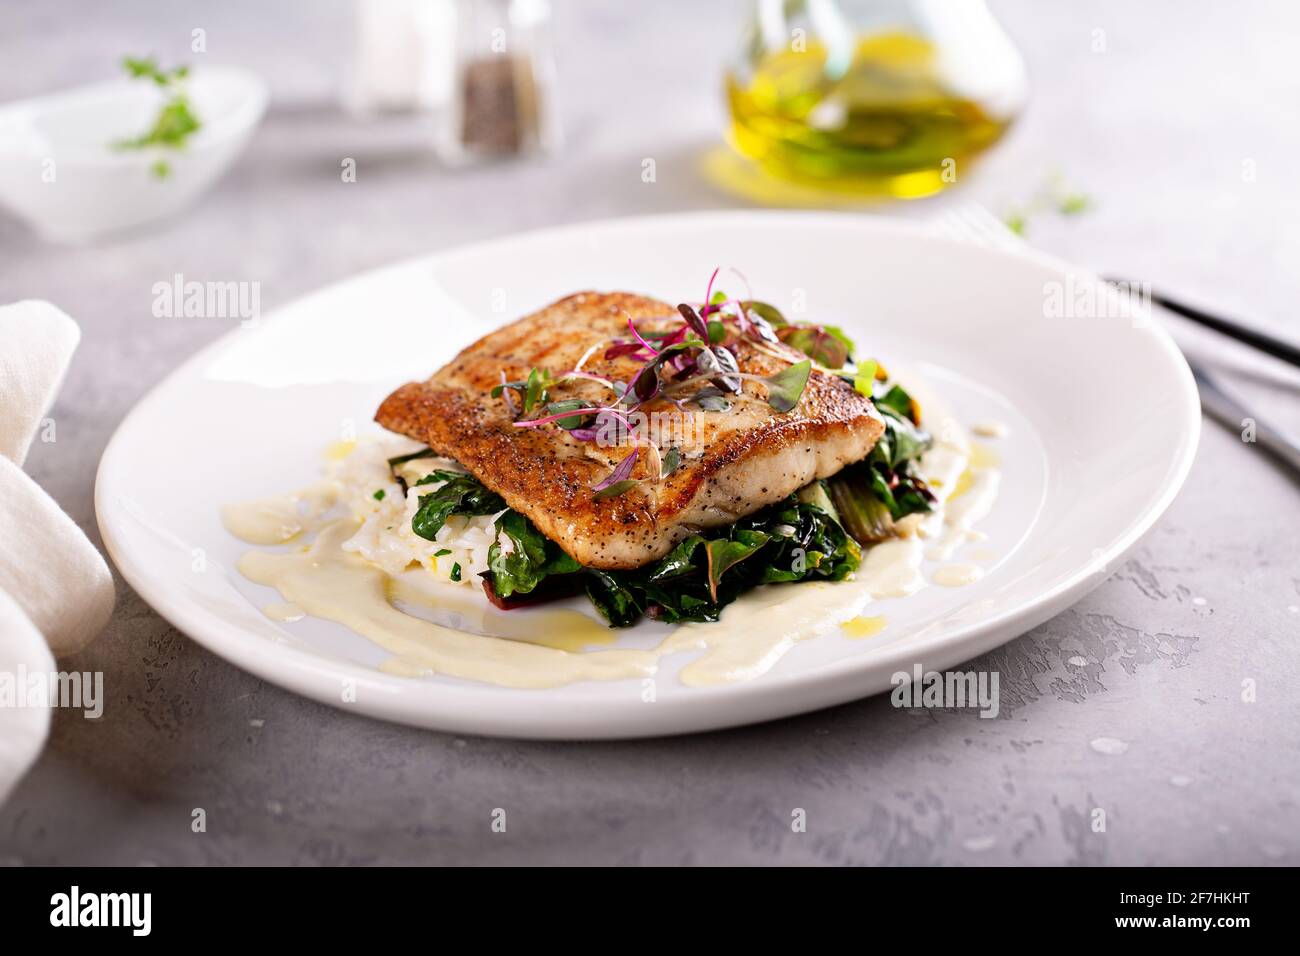 Sauteed fish with leafy greens and rice Stock Photo